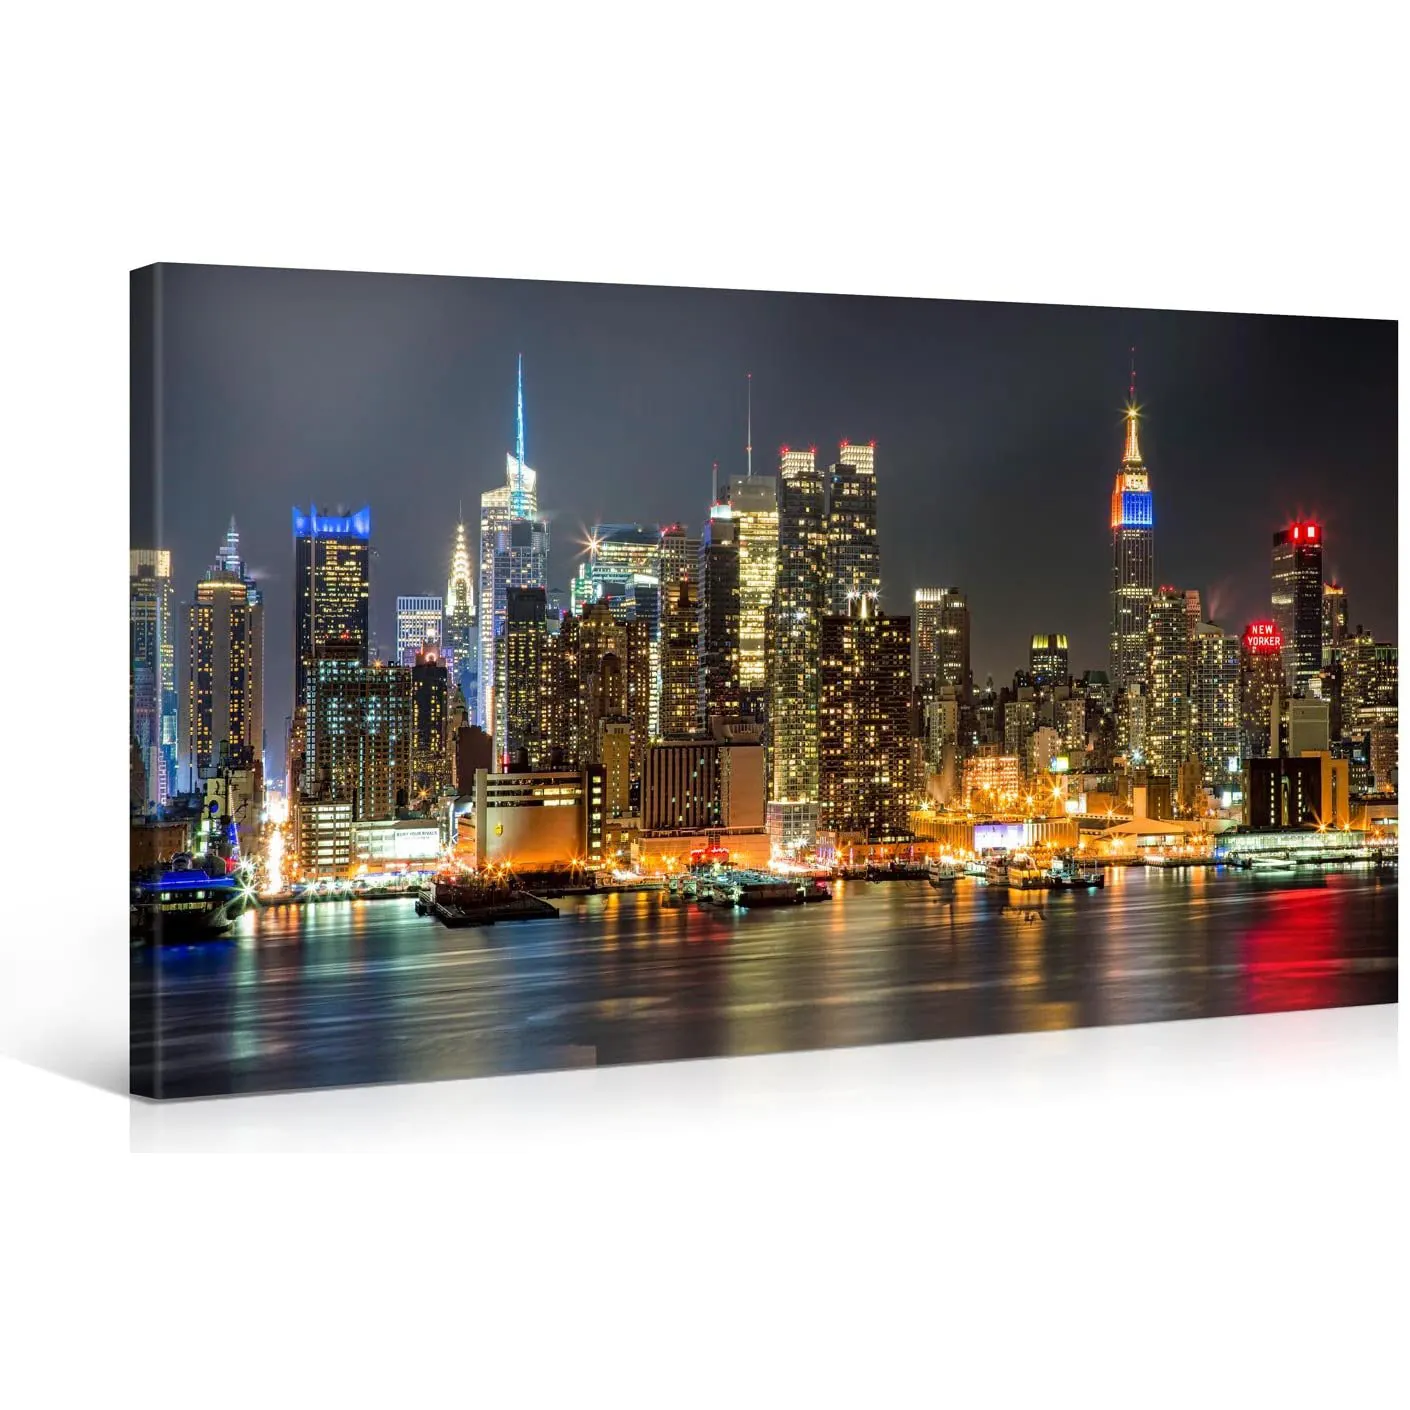 Canvas Picture Stretched On Wooden Frame Hanging Wall Decor Picture Canvas Printing Wall Art Large Printing Canvas